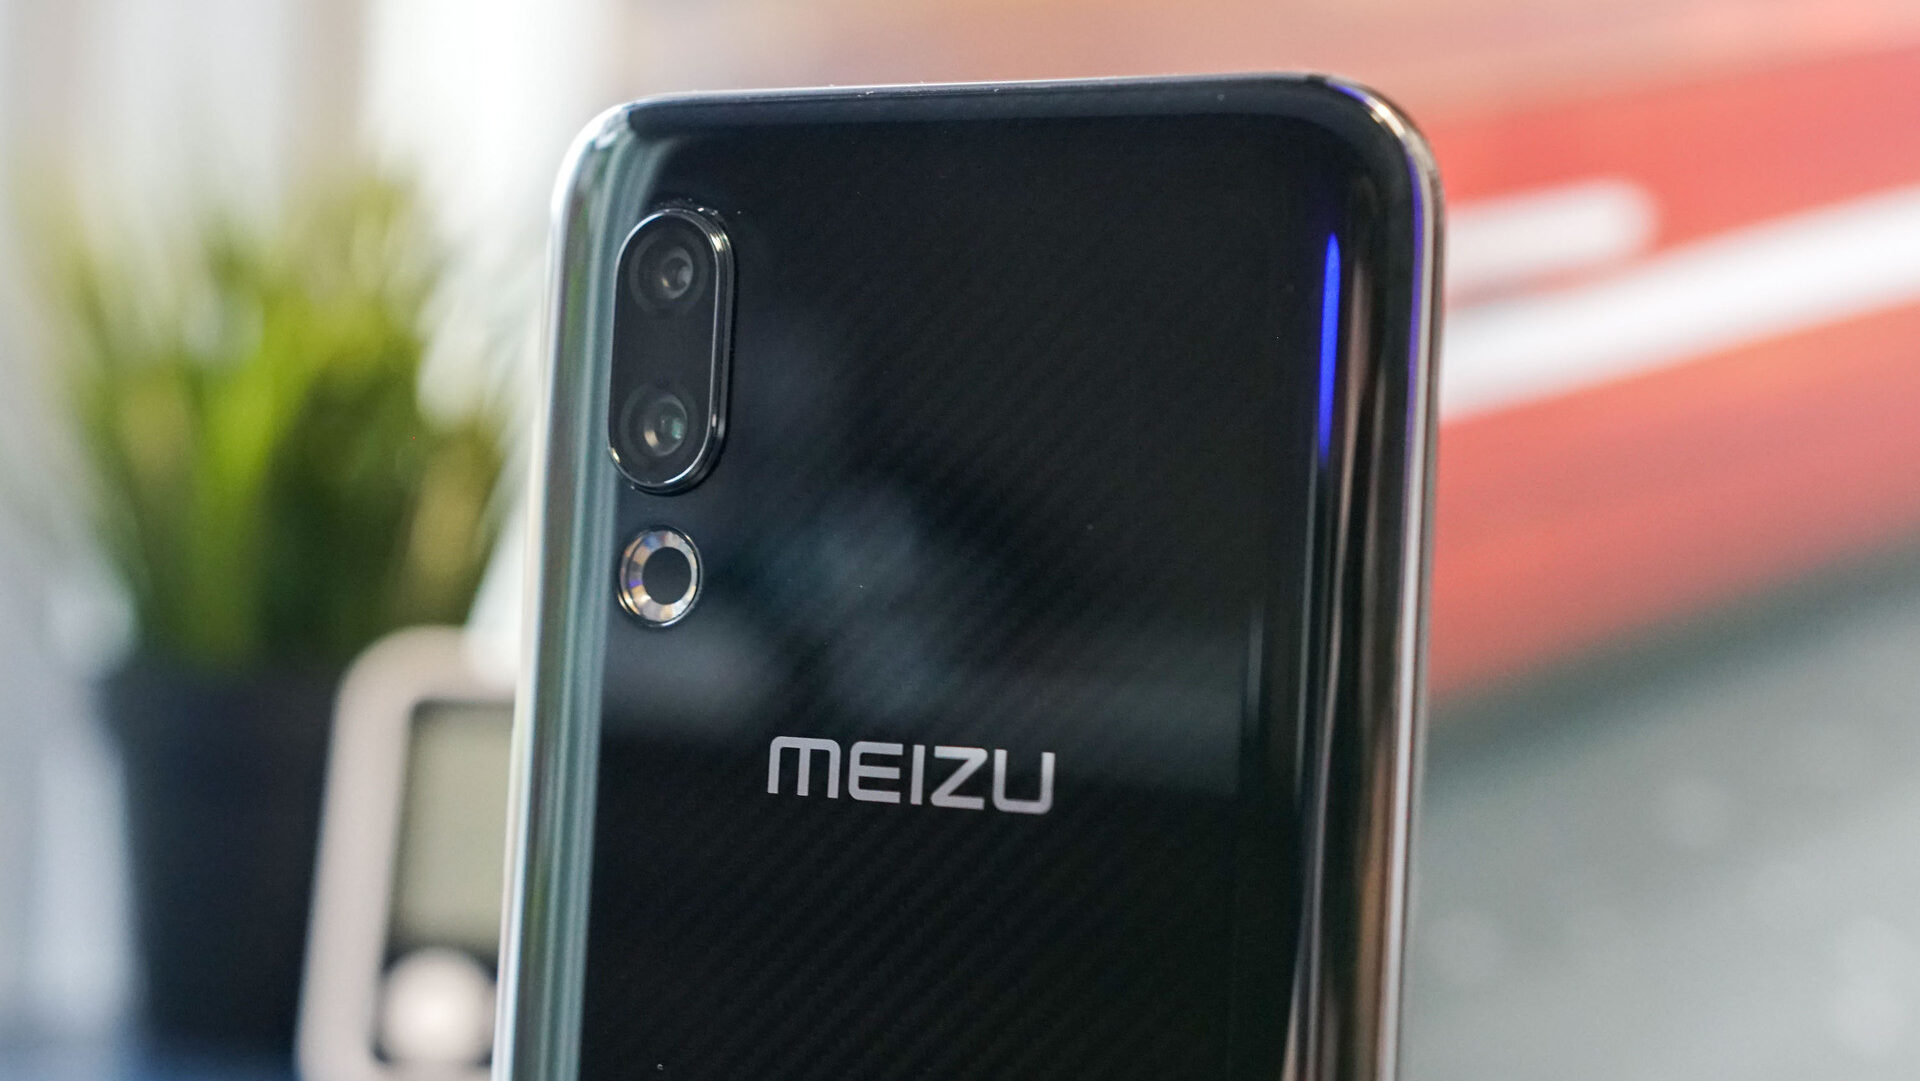 Meizu 16s back, showing logo and cameras